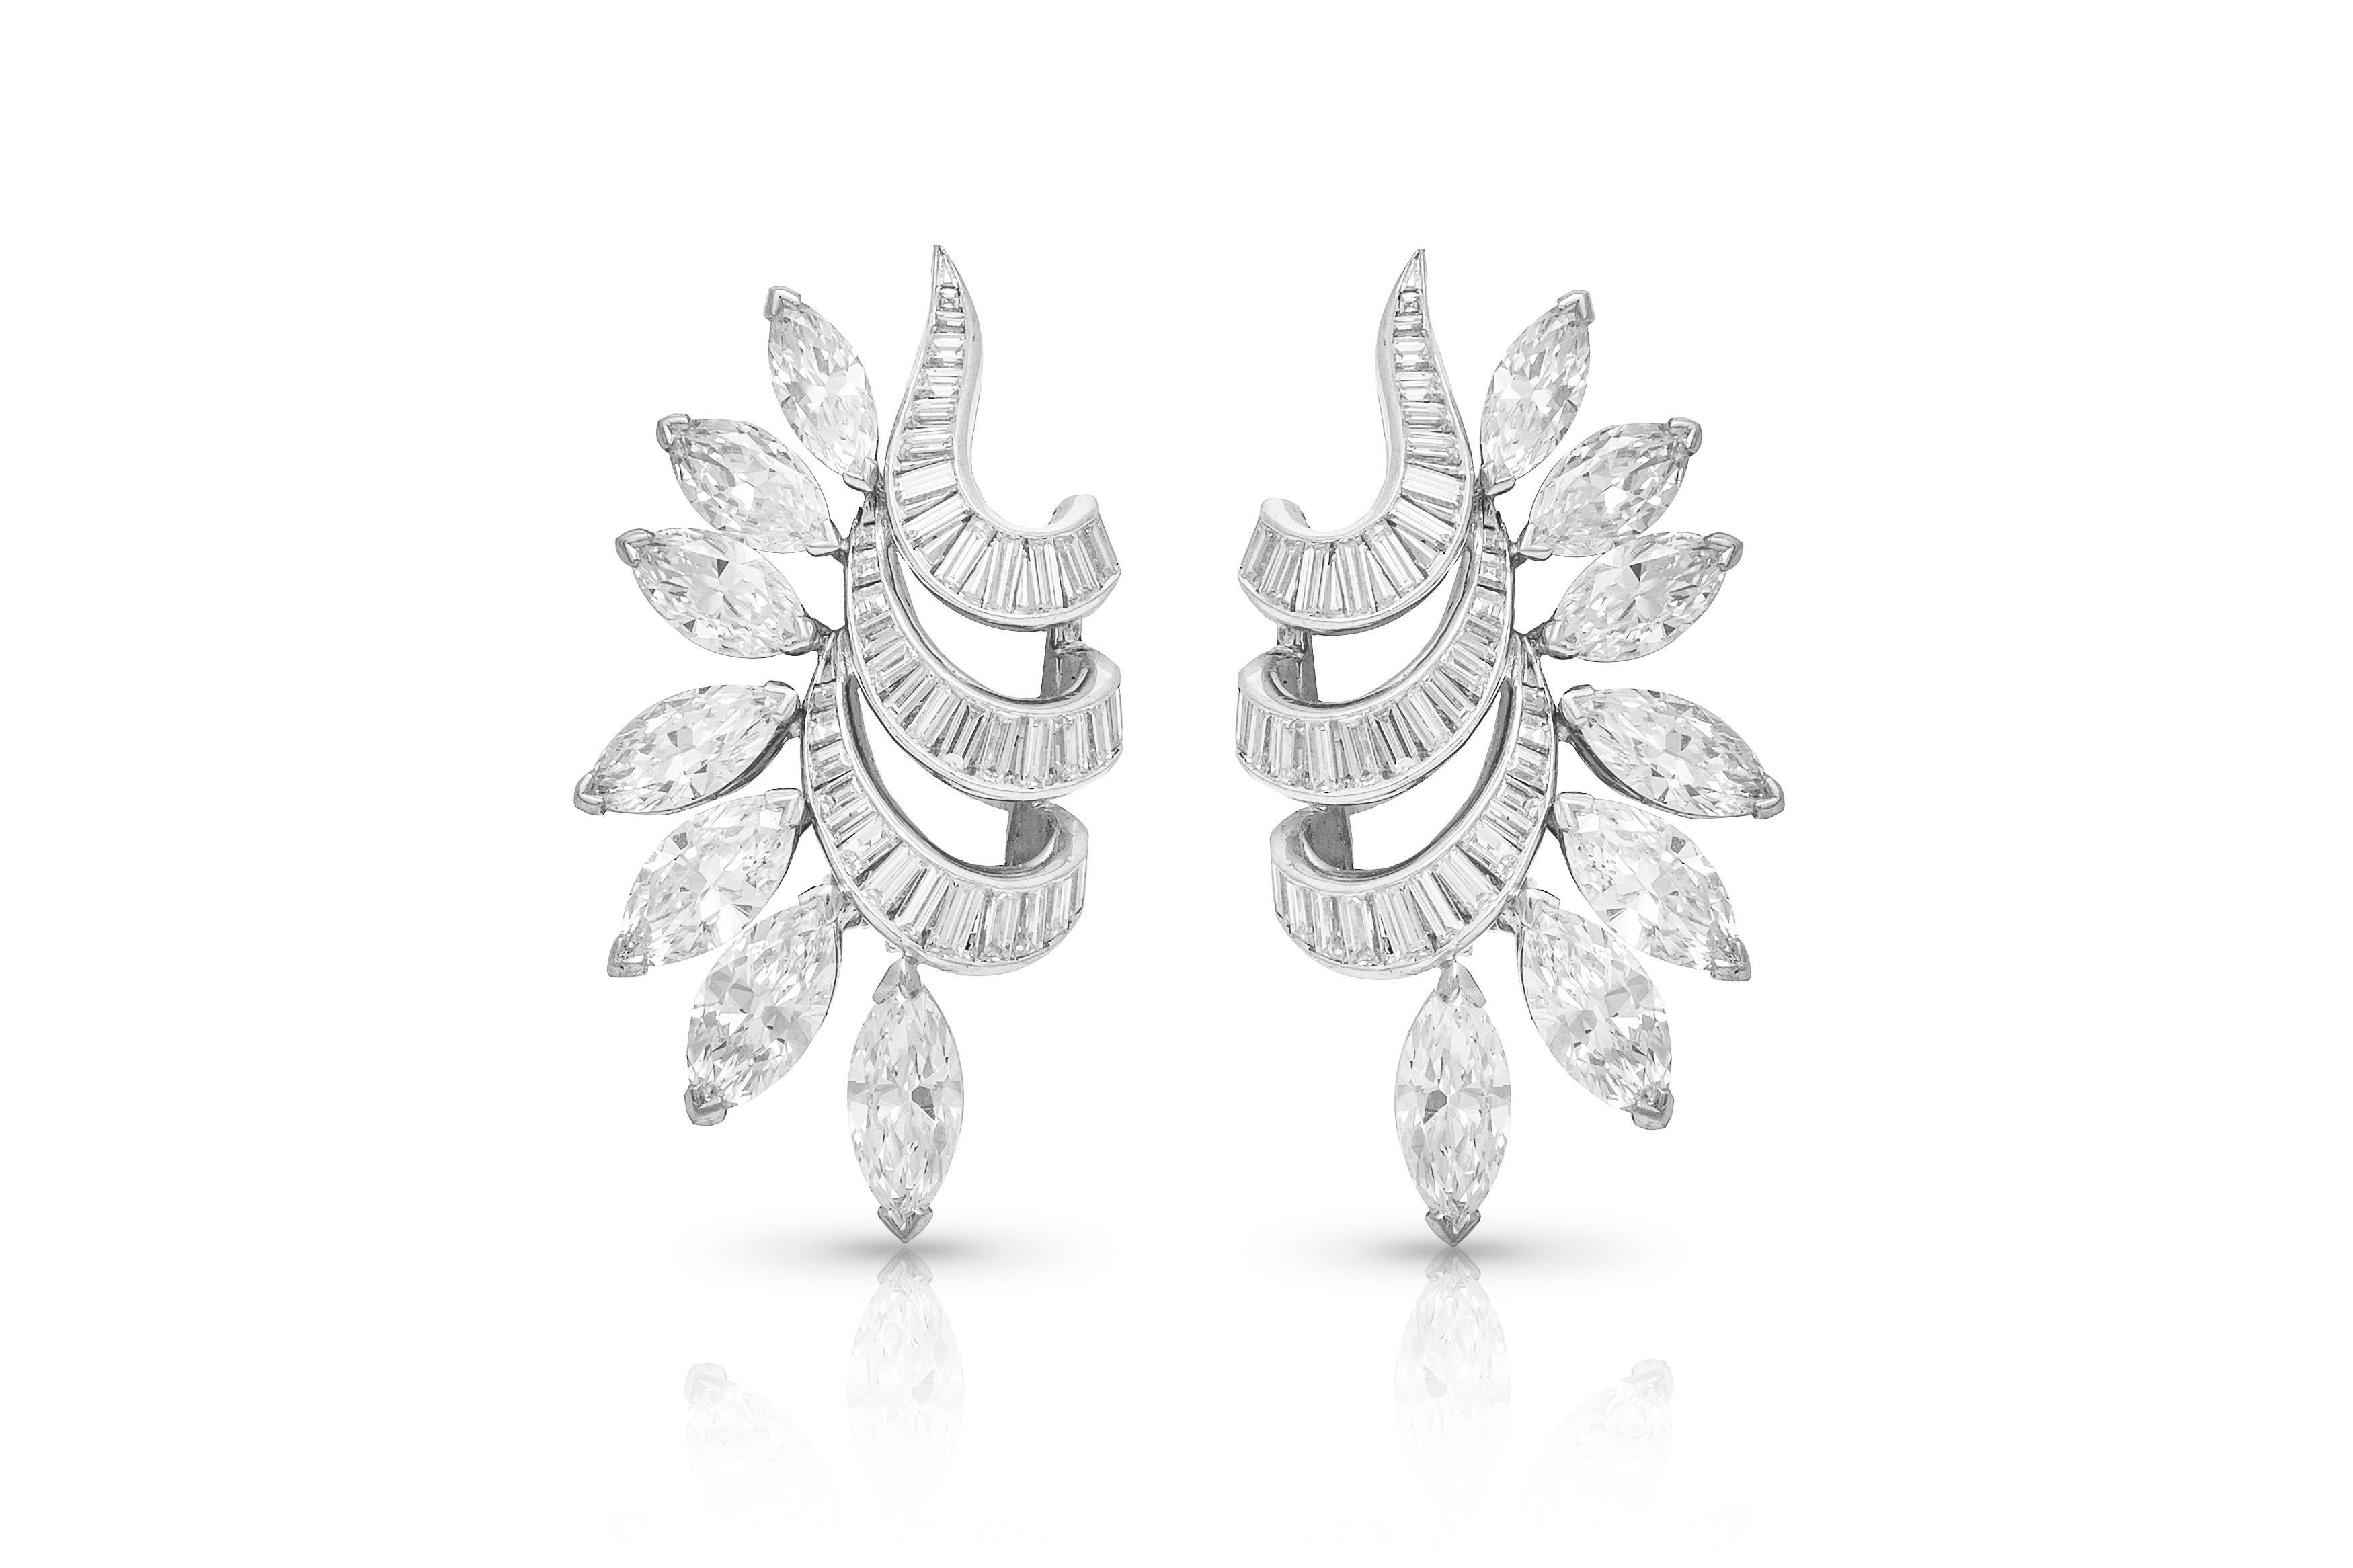 Clip-on earrings, finely crafted in platinum with diamonds weighing approximately a total of 16.00 carat. Circa 1950's.